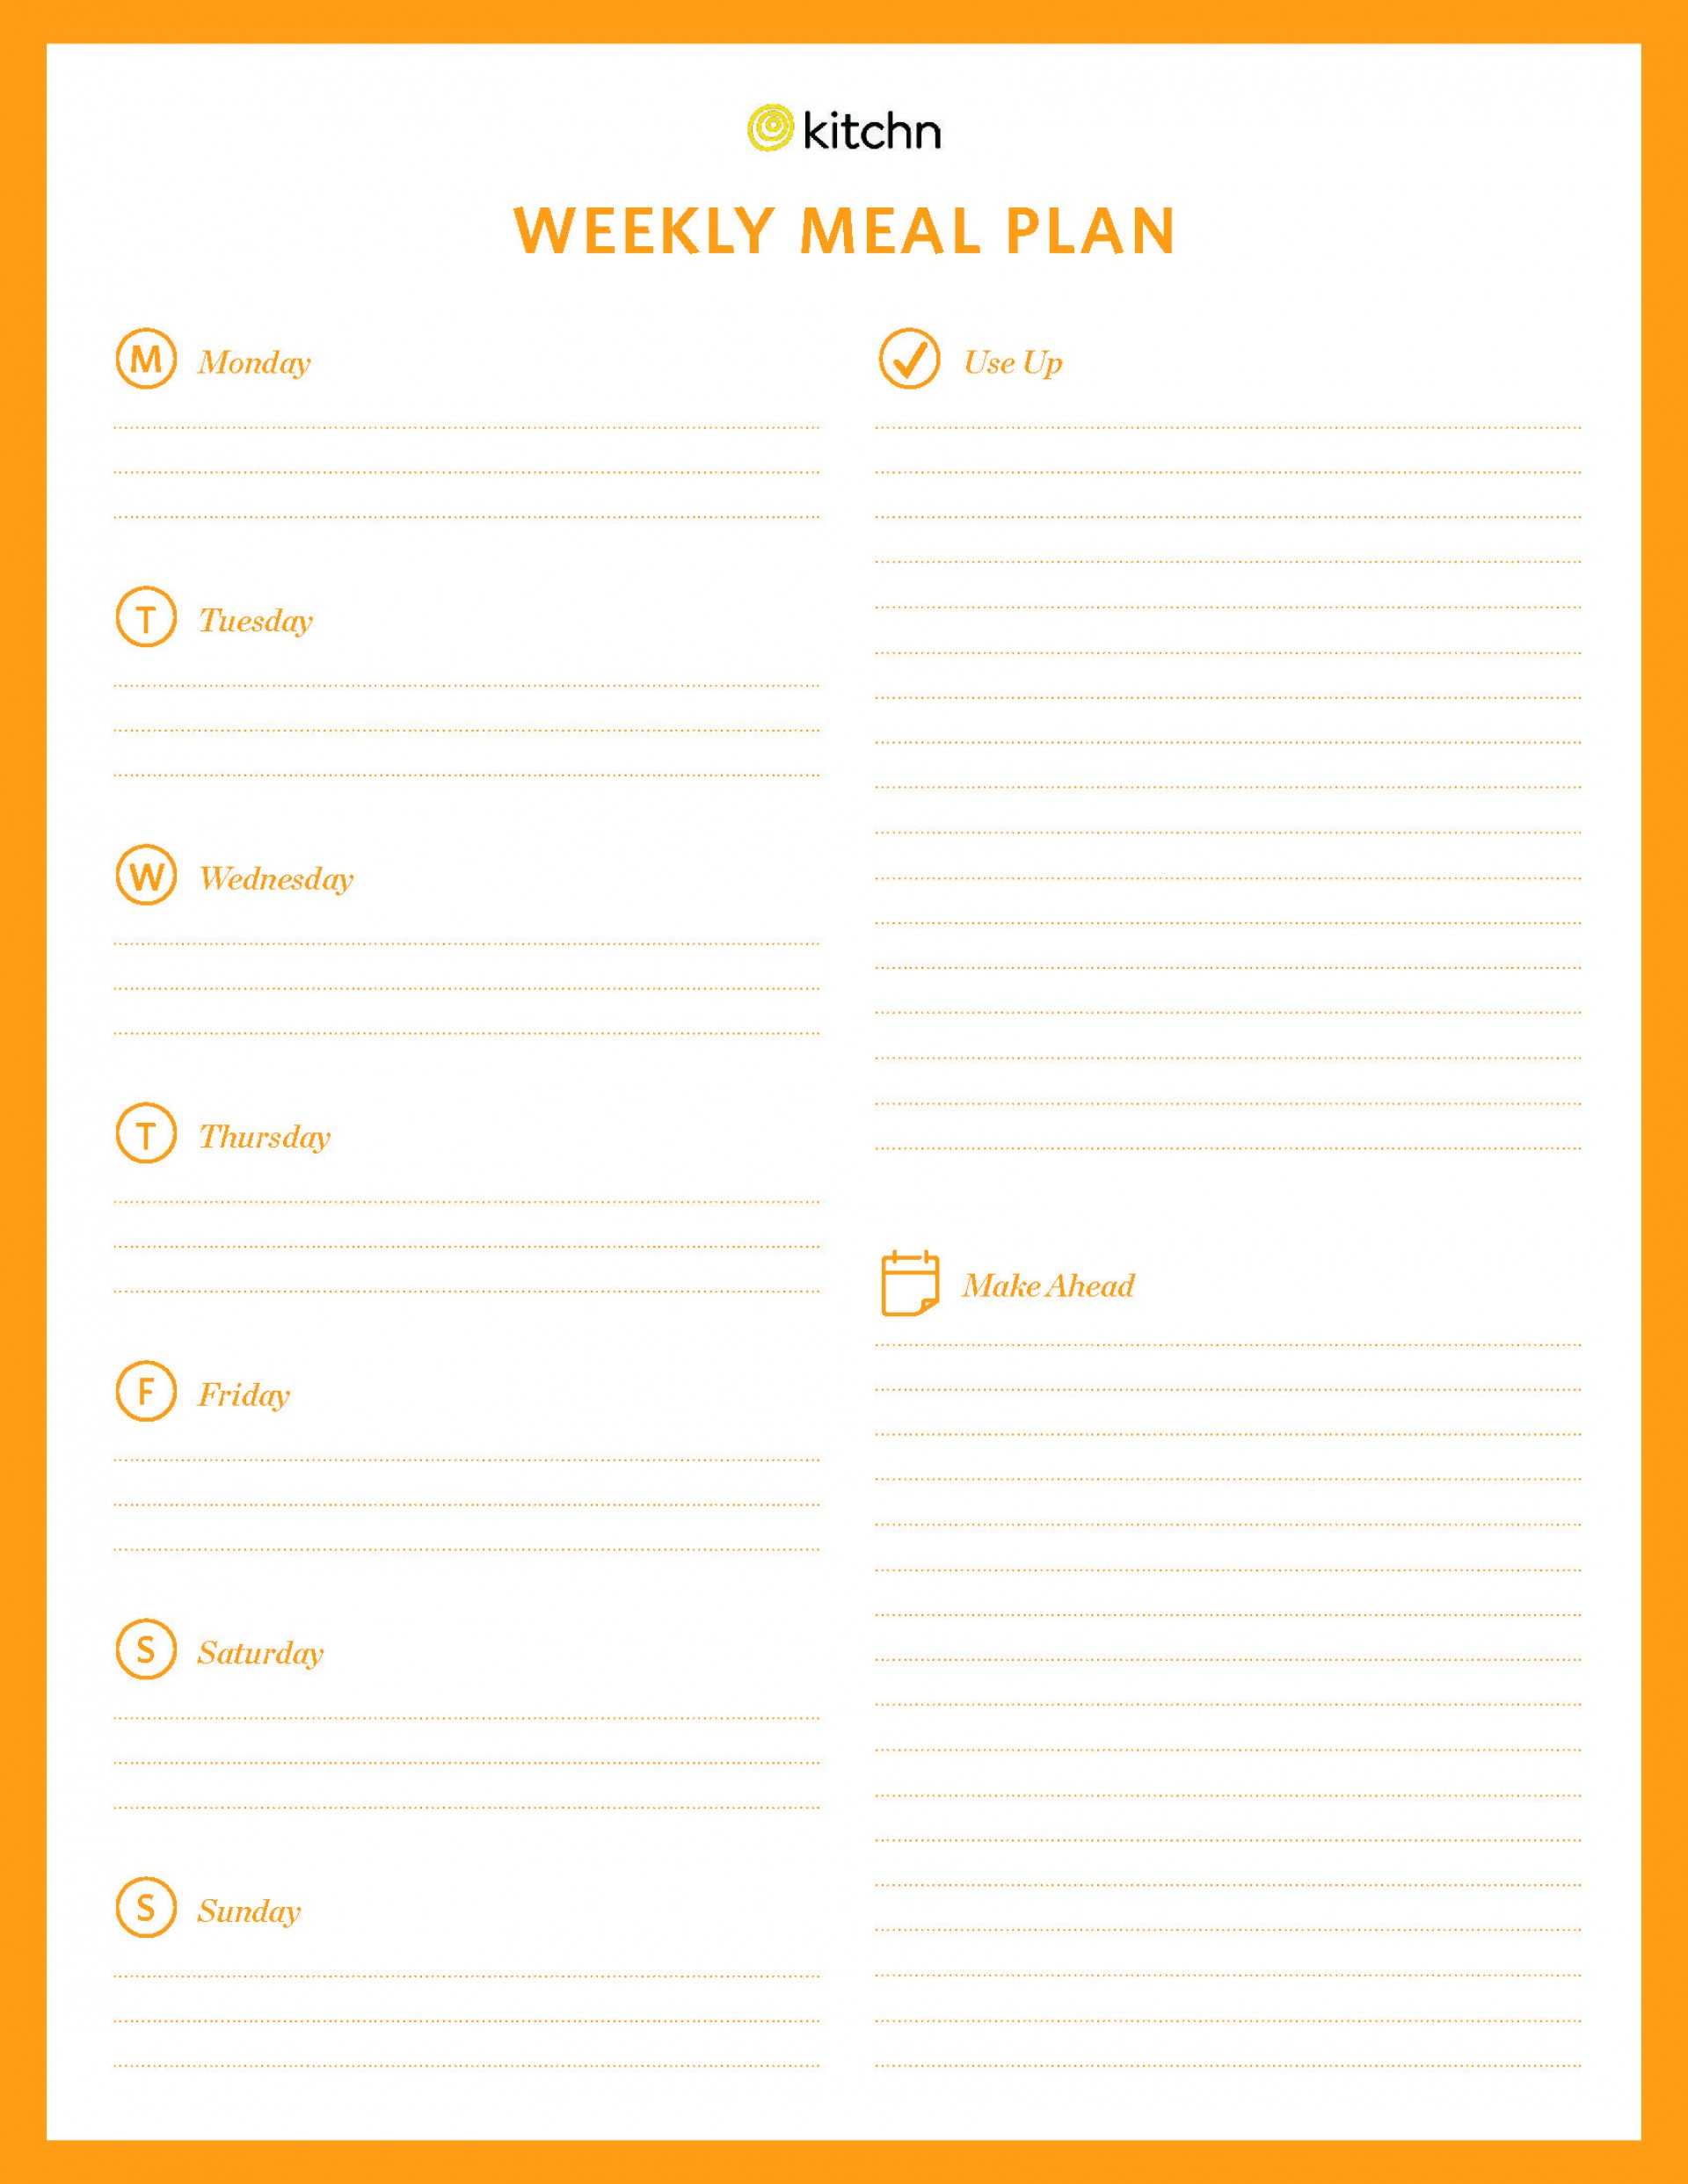 Family Menu Plan Template Colona Rsd7 Org E Weekly Schedule For Menu Planning Template Word